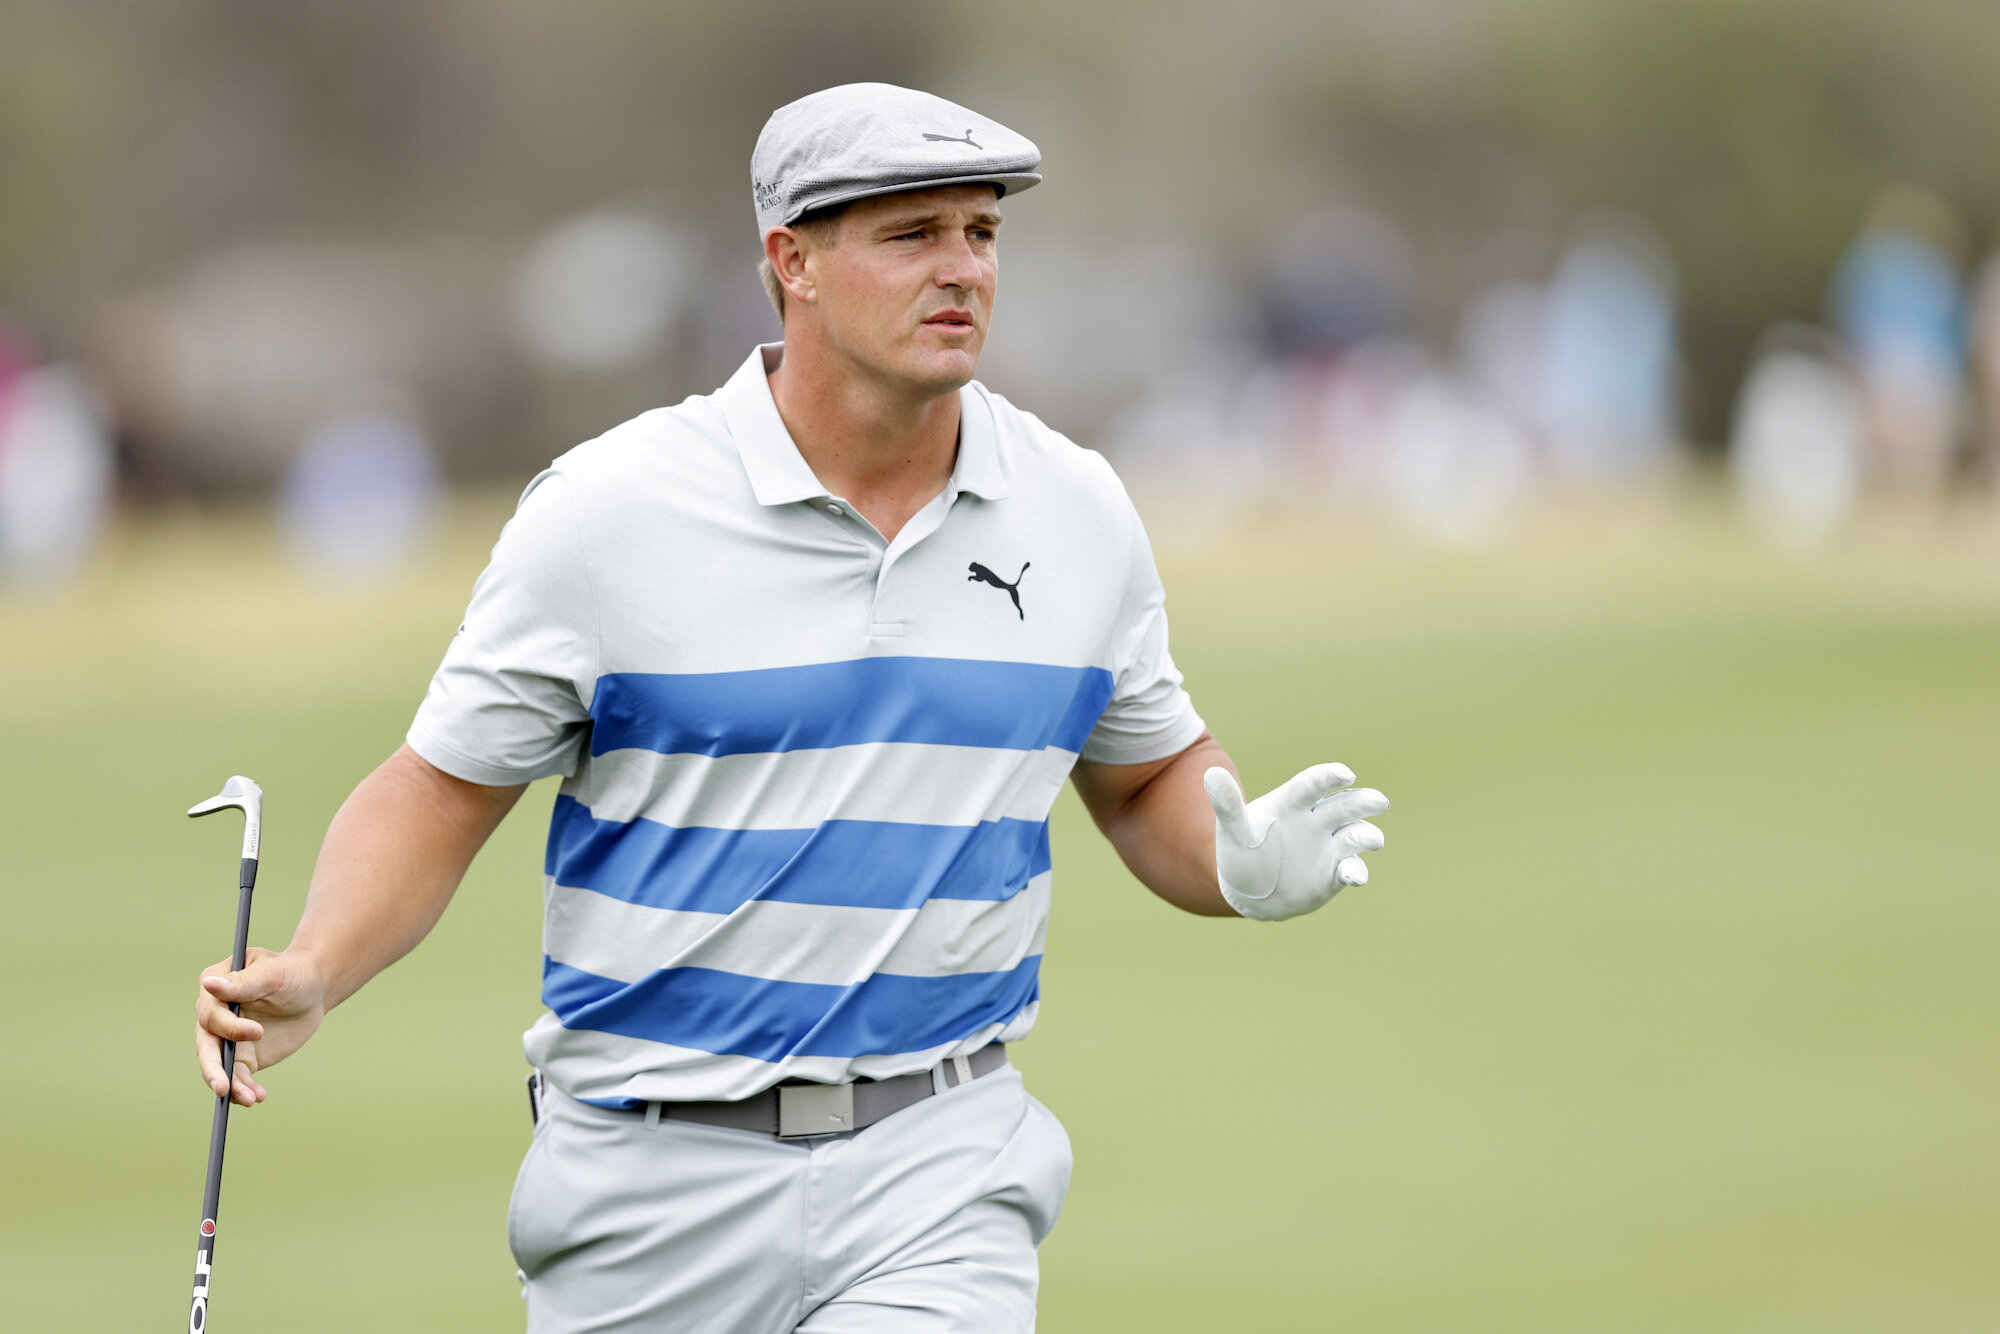  AUSTIN, TEXAS - MARCH 24: Bryson DeChambeau reacts to a shot on the 13th hole in his match against Antoine Rozner of France during the first round of the World Golf Championships-Dell Technologies Match Play at Austin Country Club on March 24, 2021 